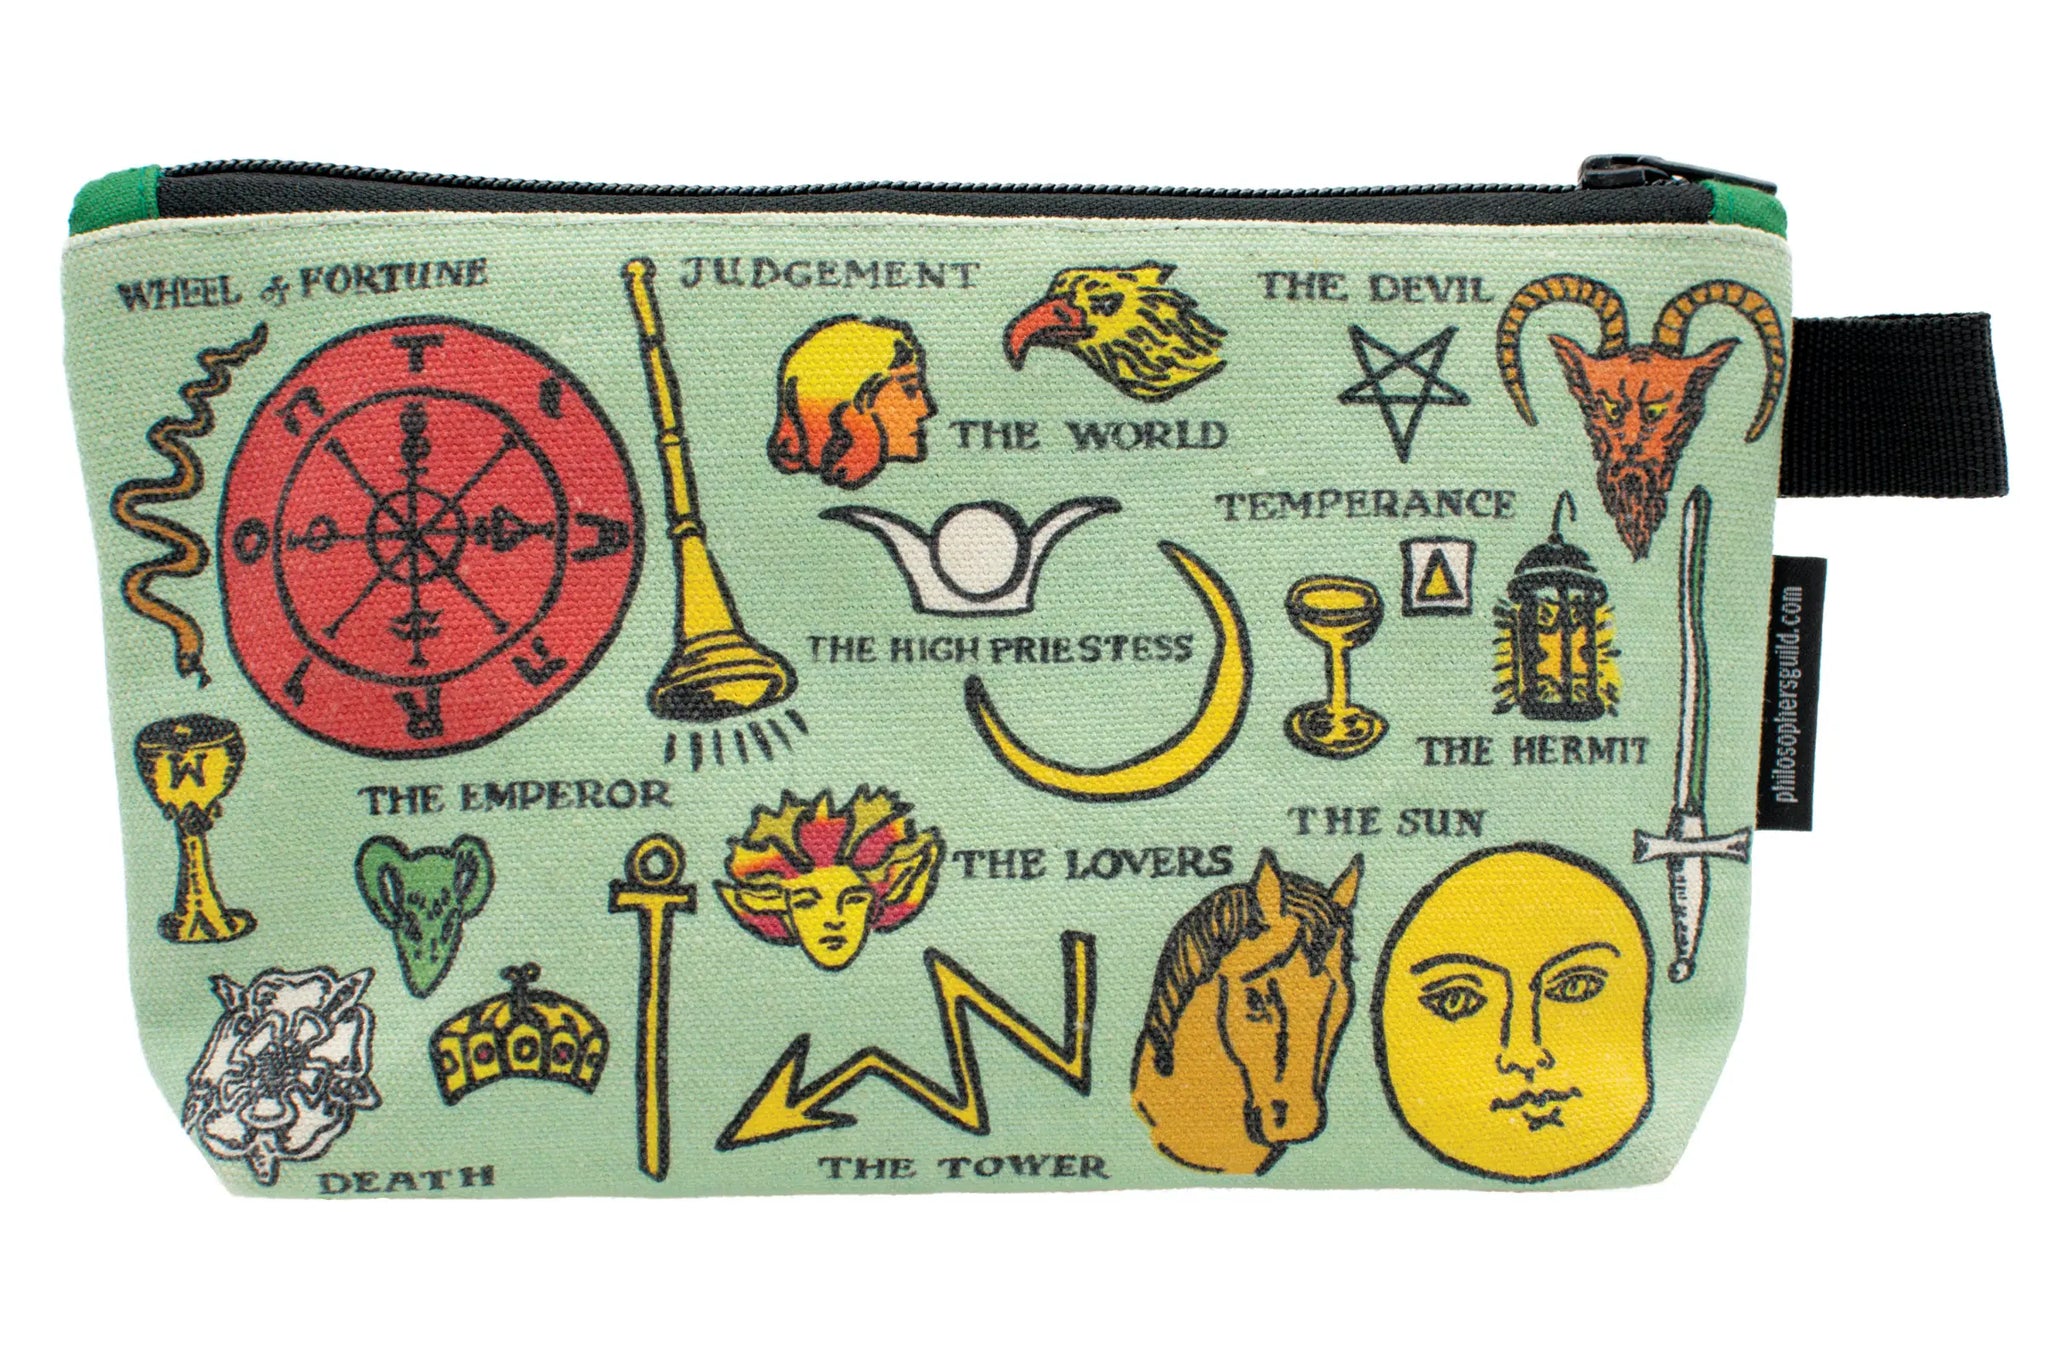 A light teal canvas pouch with zipper that is printed with colorful images from the Rider Waite tarot deck